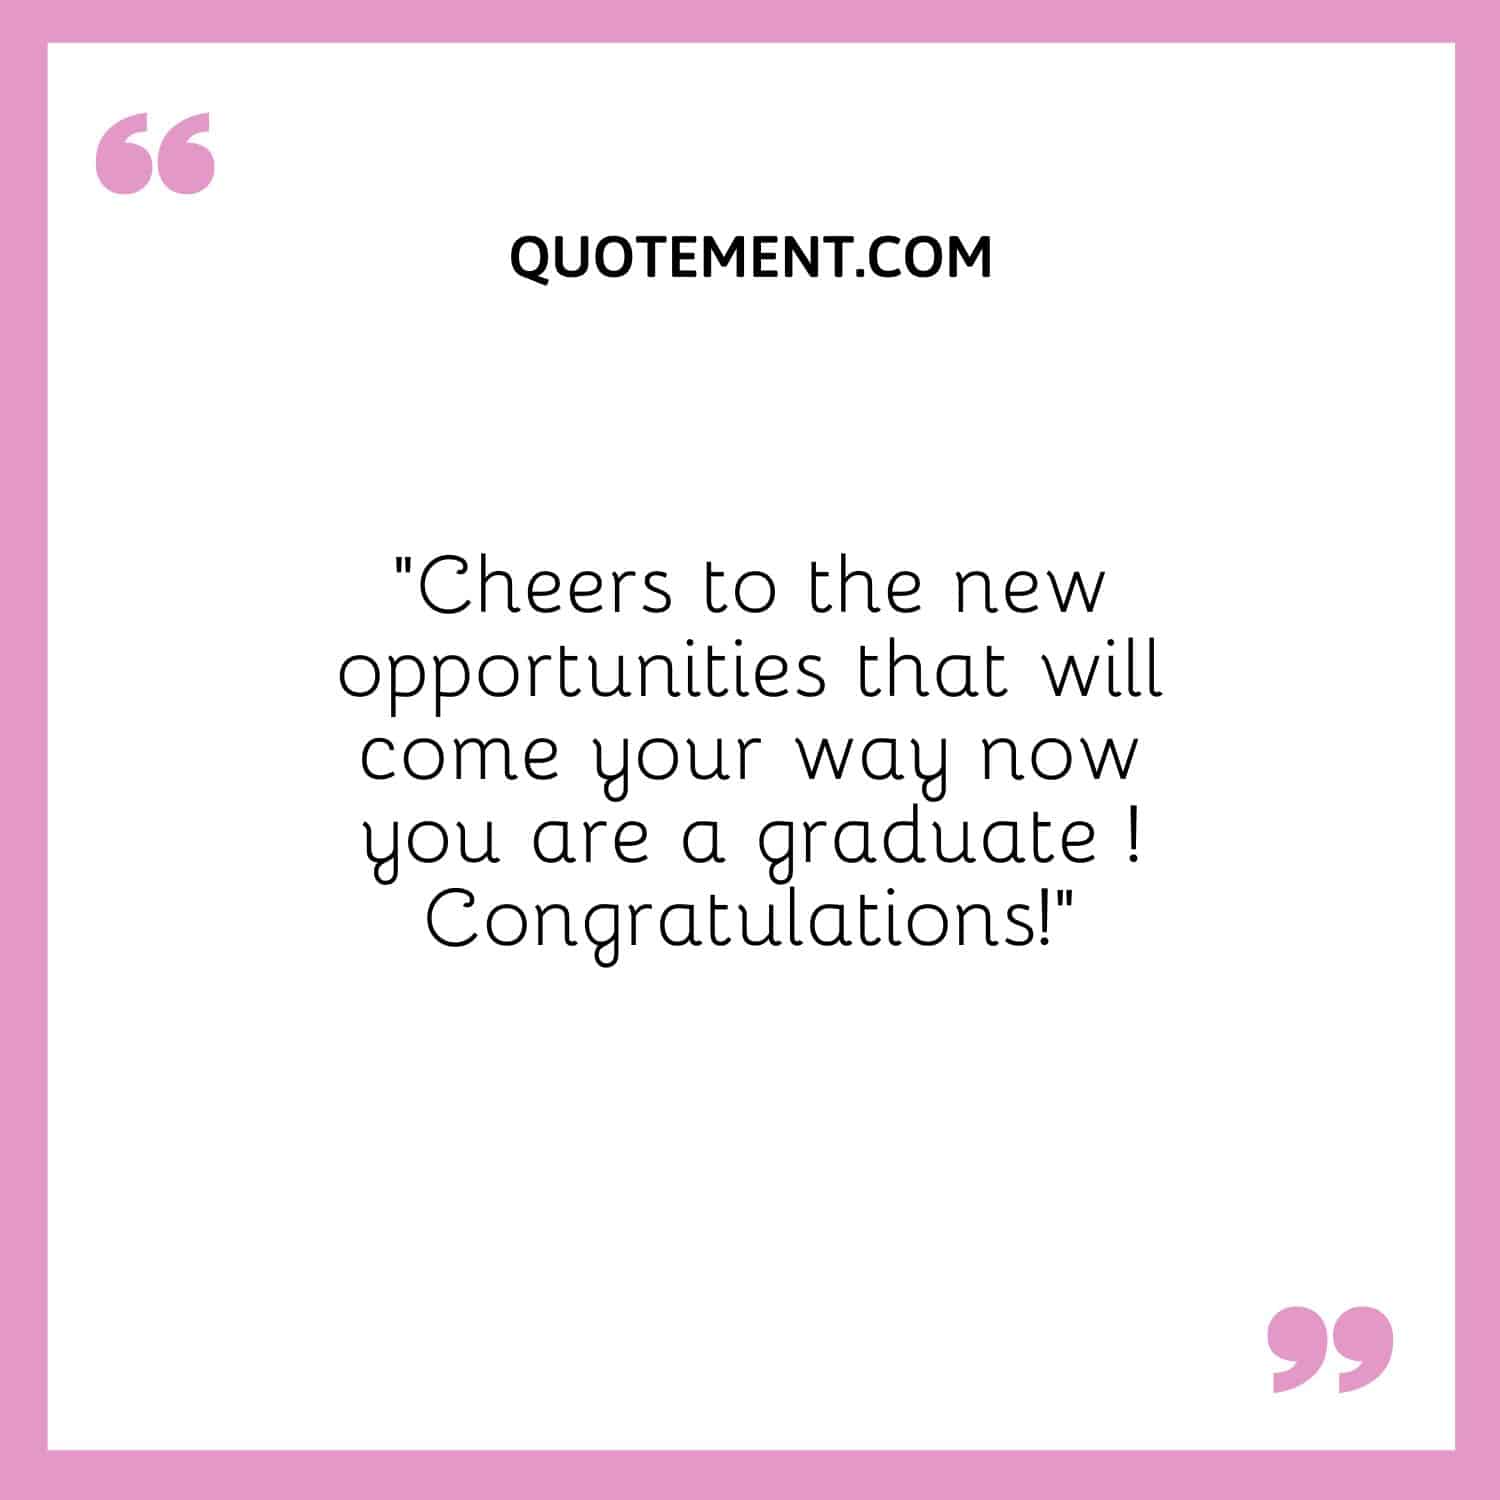 “Cheers to the new opportunities that will come your way now you are a graduate ! Congratulations!”